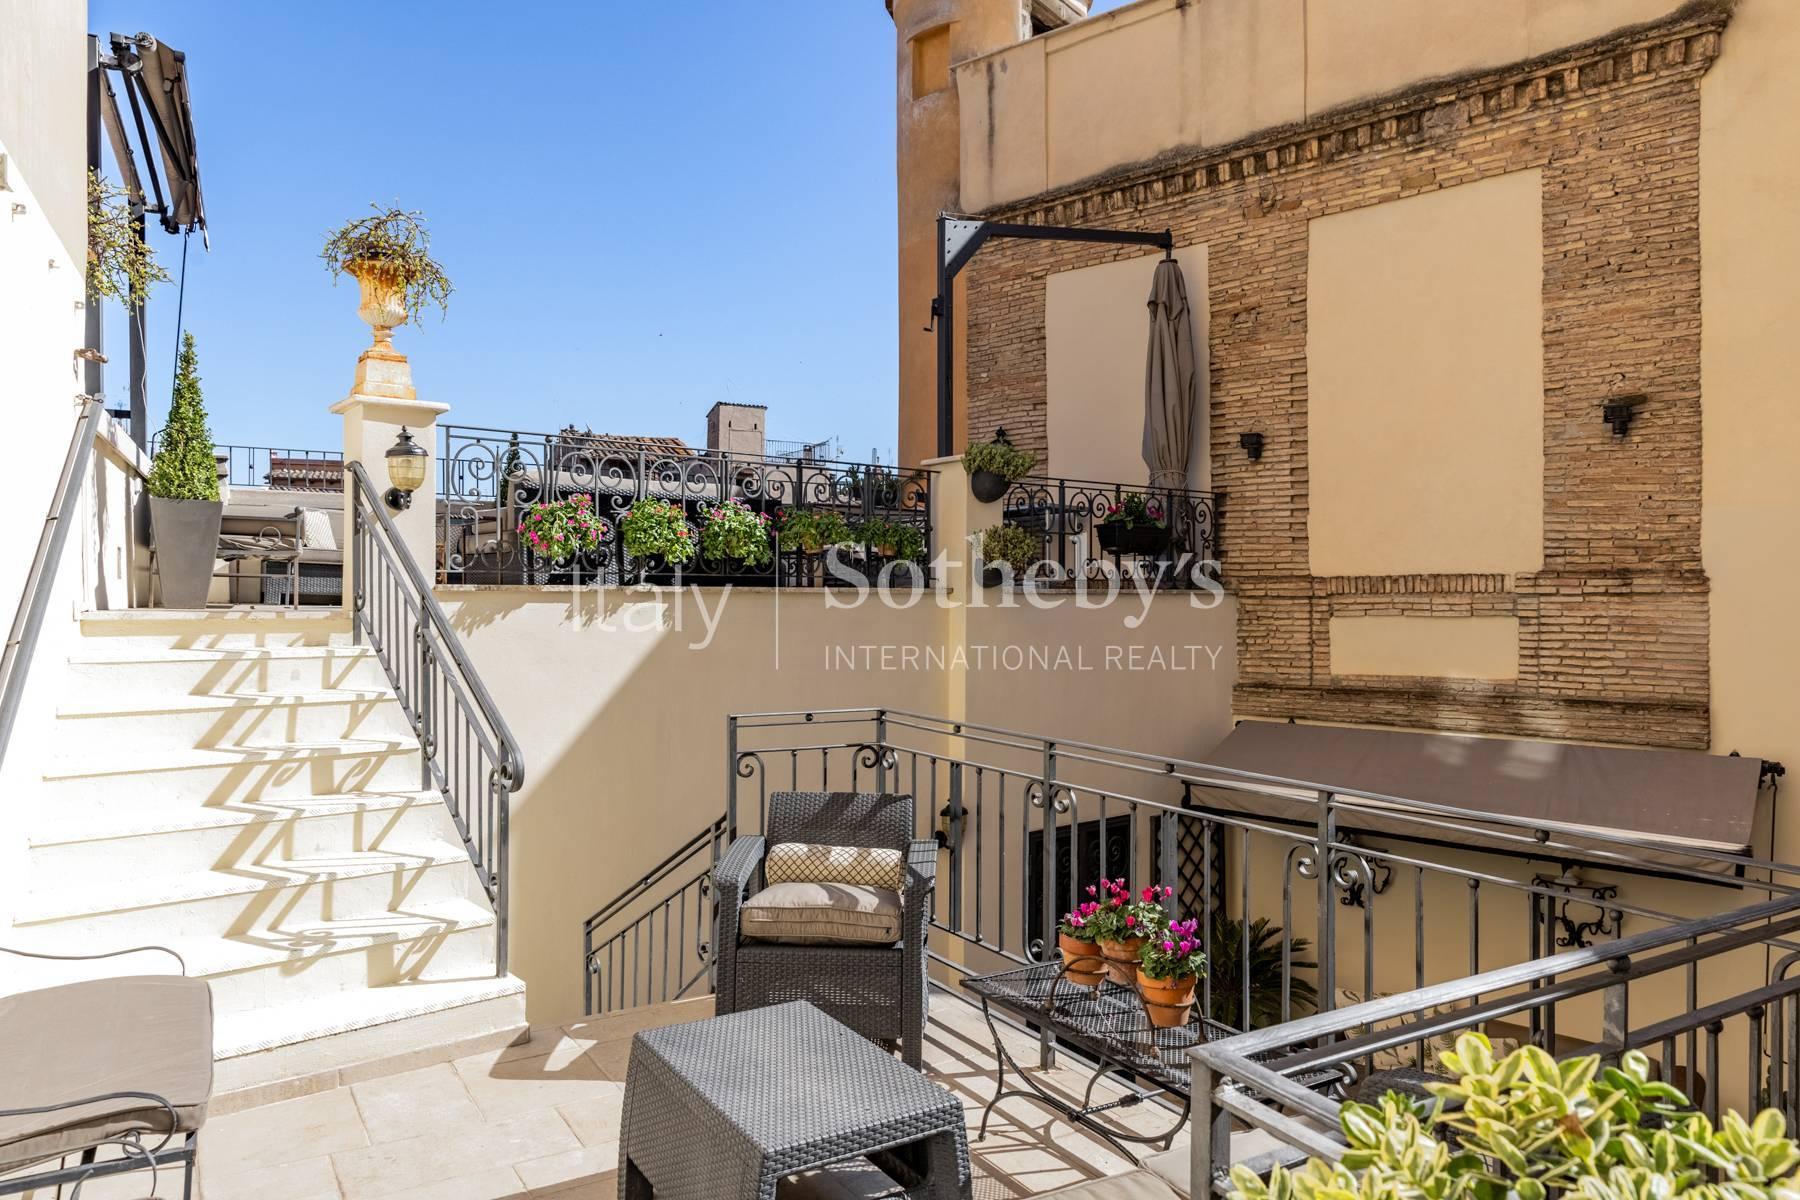 Apartment with terraces a stone's throw from Piazza Navona - 6